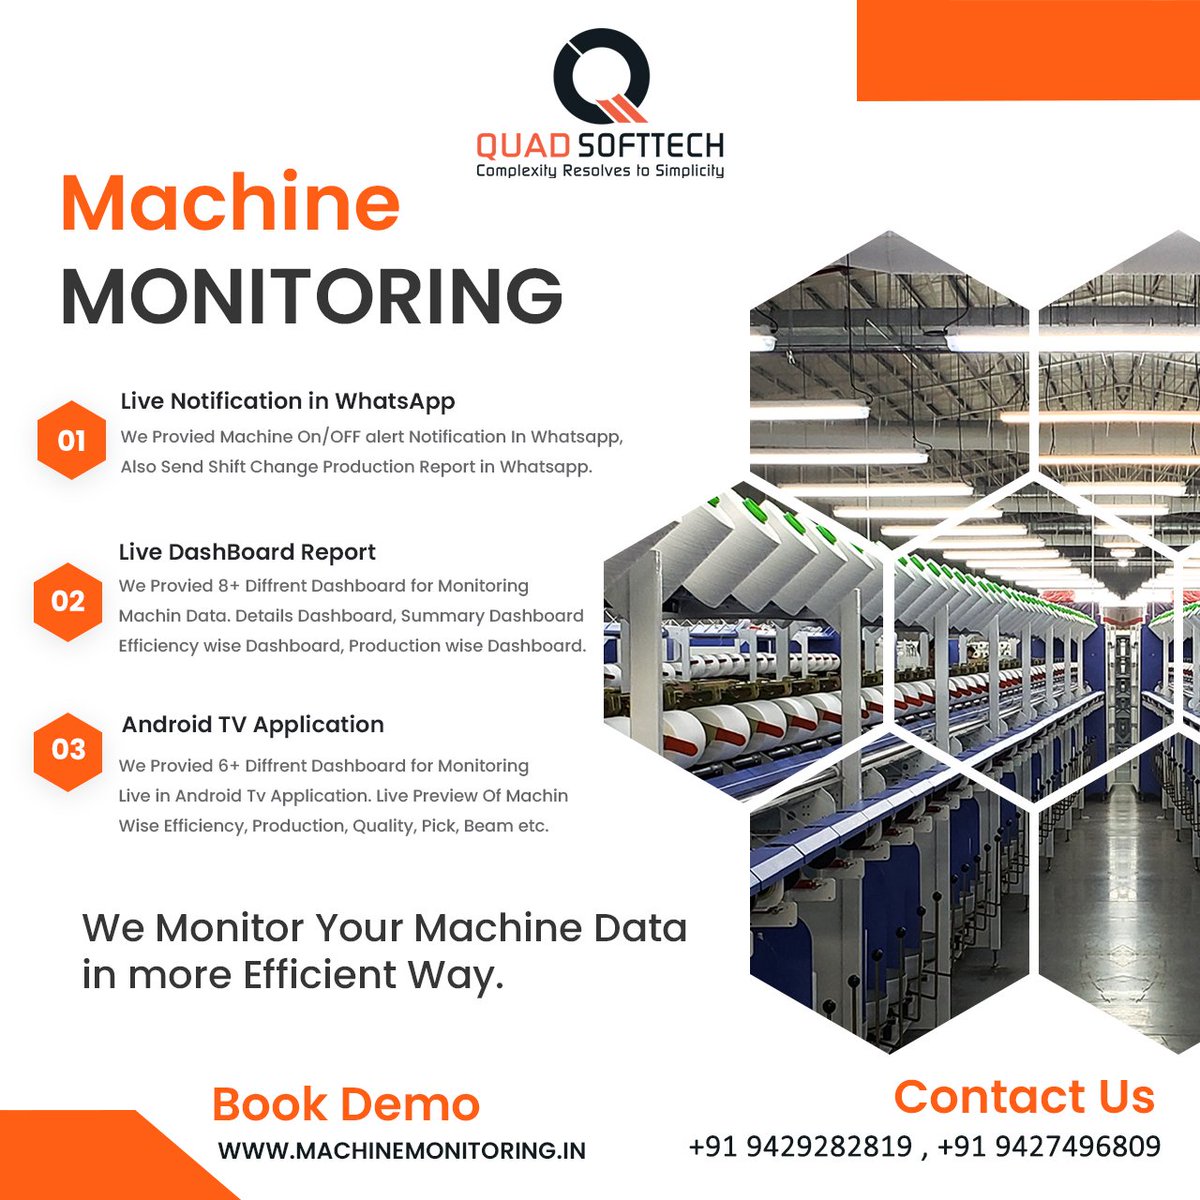 Machine monitoring system. It helps to increase your machine's efficiency and production using our Quad MMS.

#QuadSoftTech #MMS #MachineMonitoring #TextileMonitoring #IndustrialIoT #MMSMachineMonitoringSystem #MachineMonitoringSystemsLTD #Surat #Gujarat #India